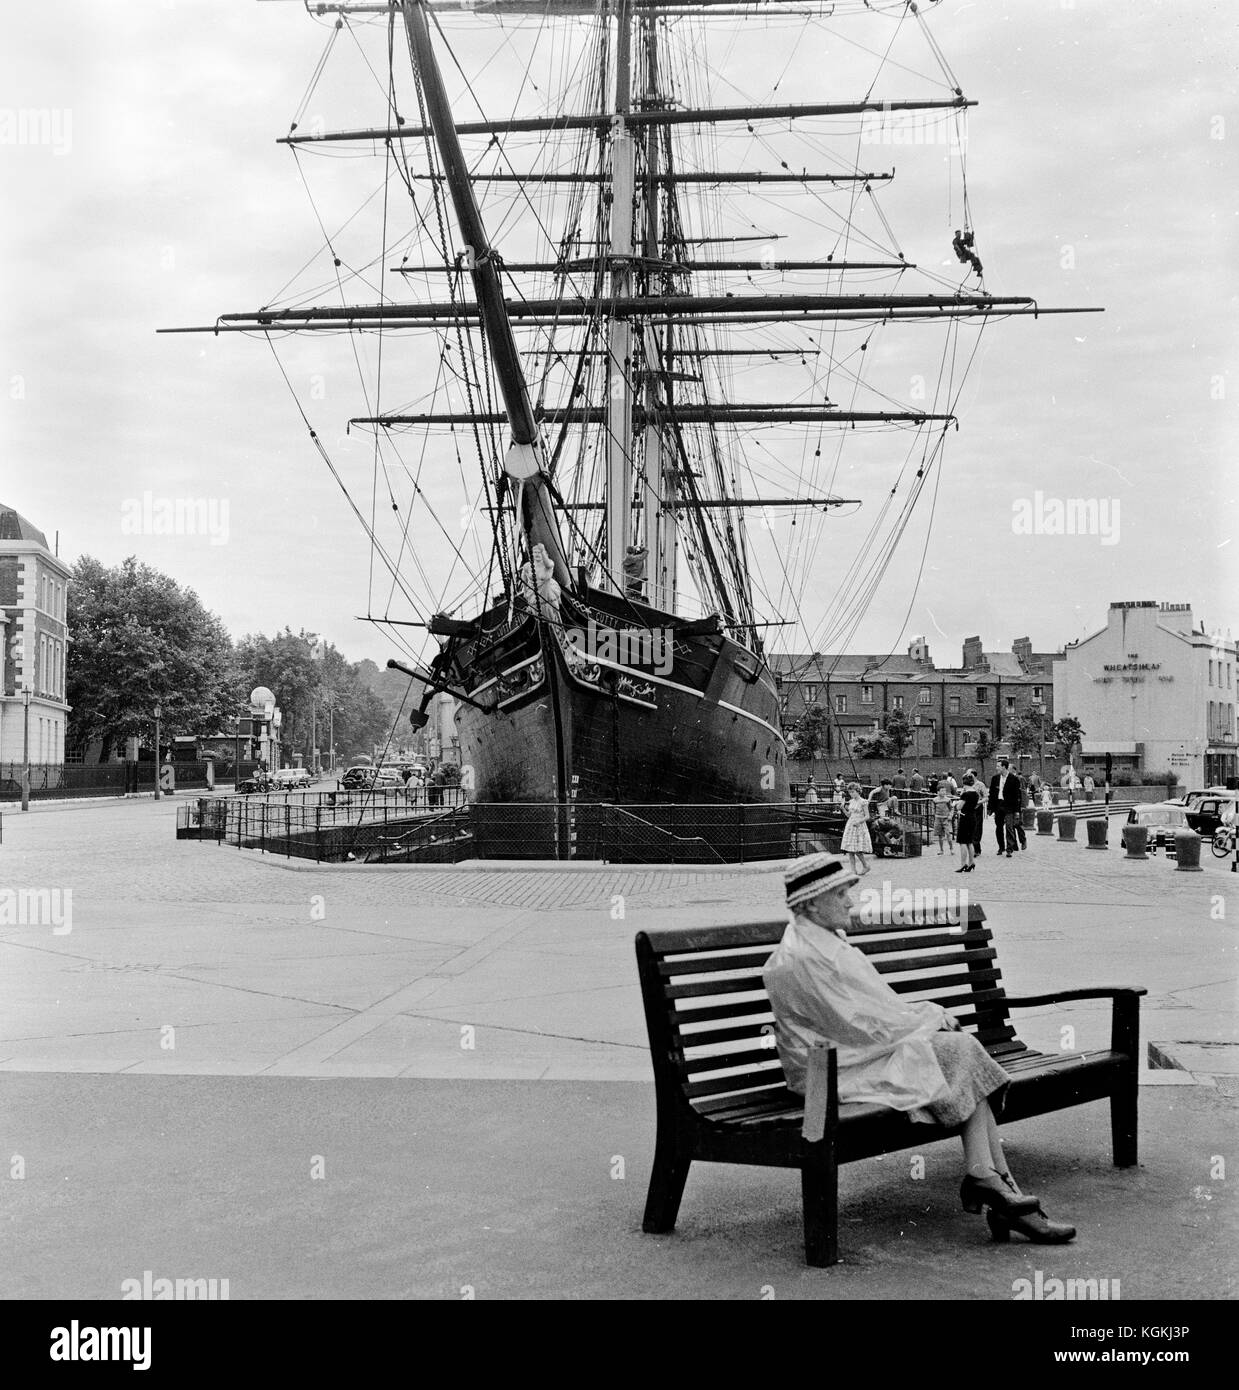 Museum ship Cutty Sark in its dry dock in Greenwich in 1961 with an old lady sitting on a bench in the foreground Stock Photo